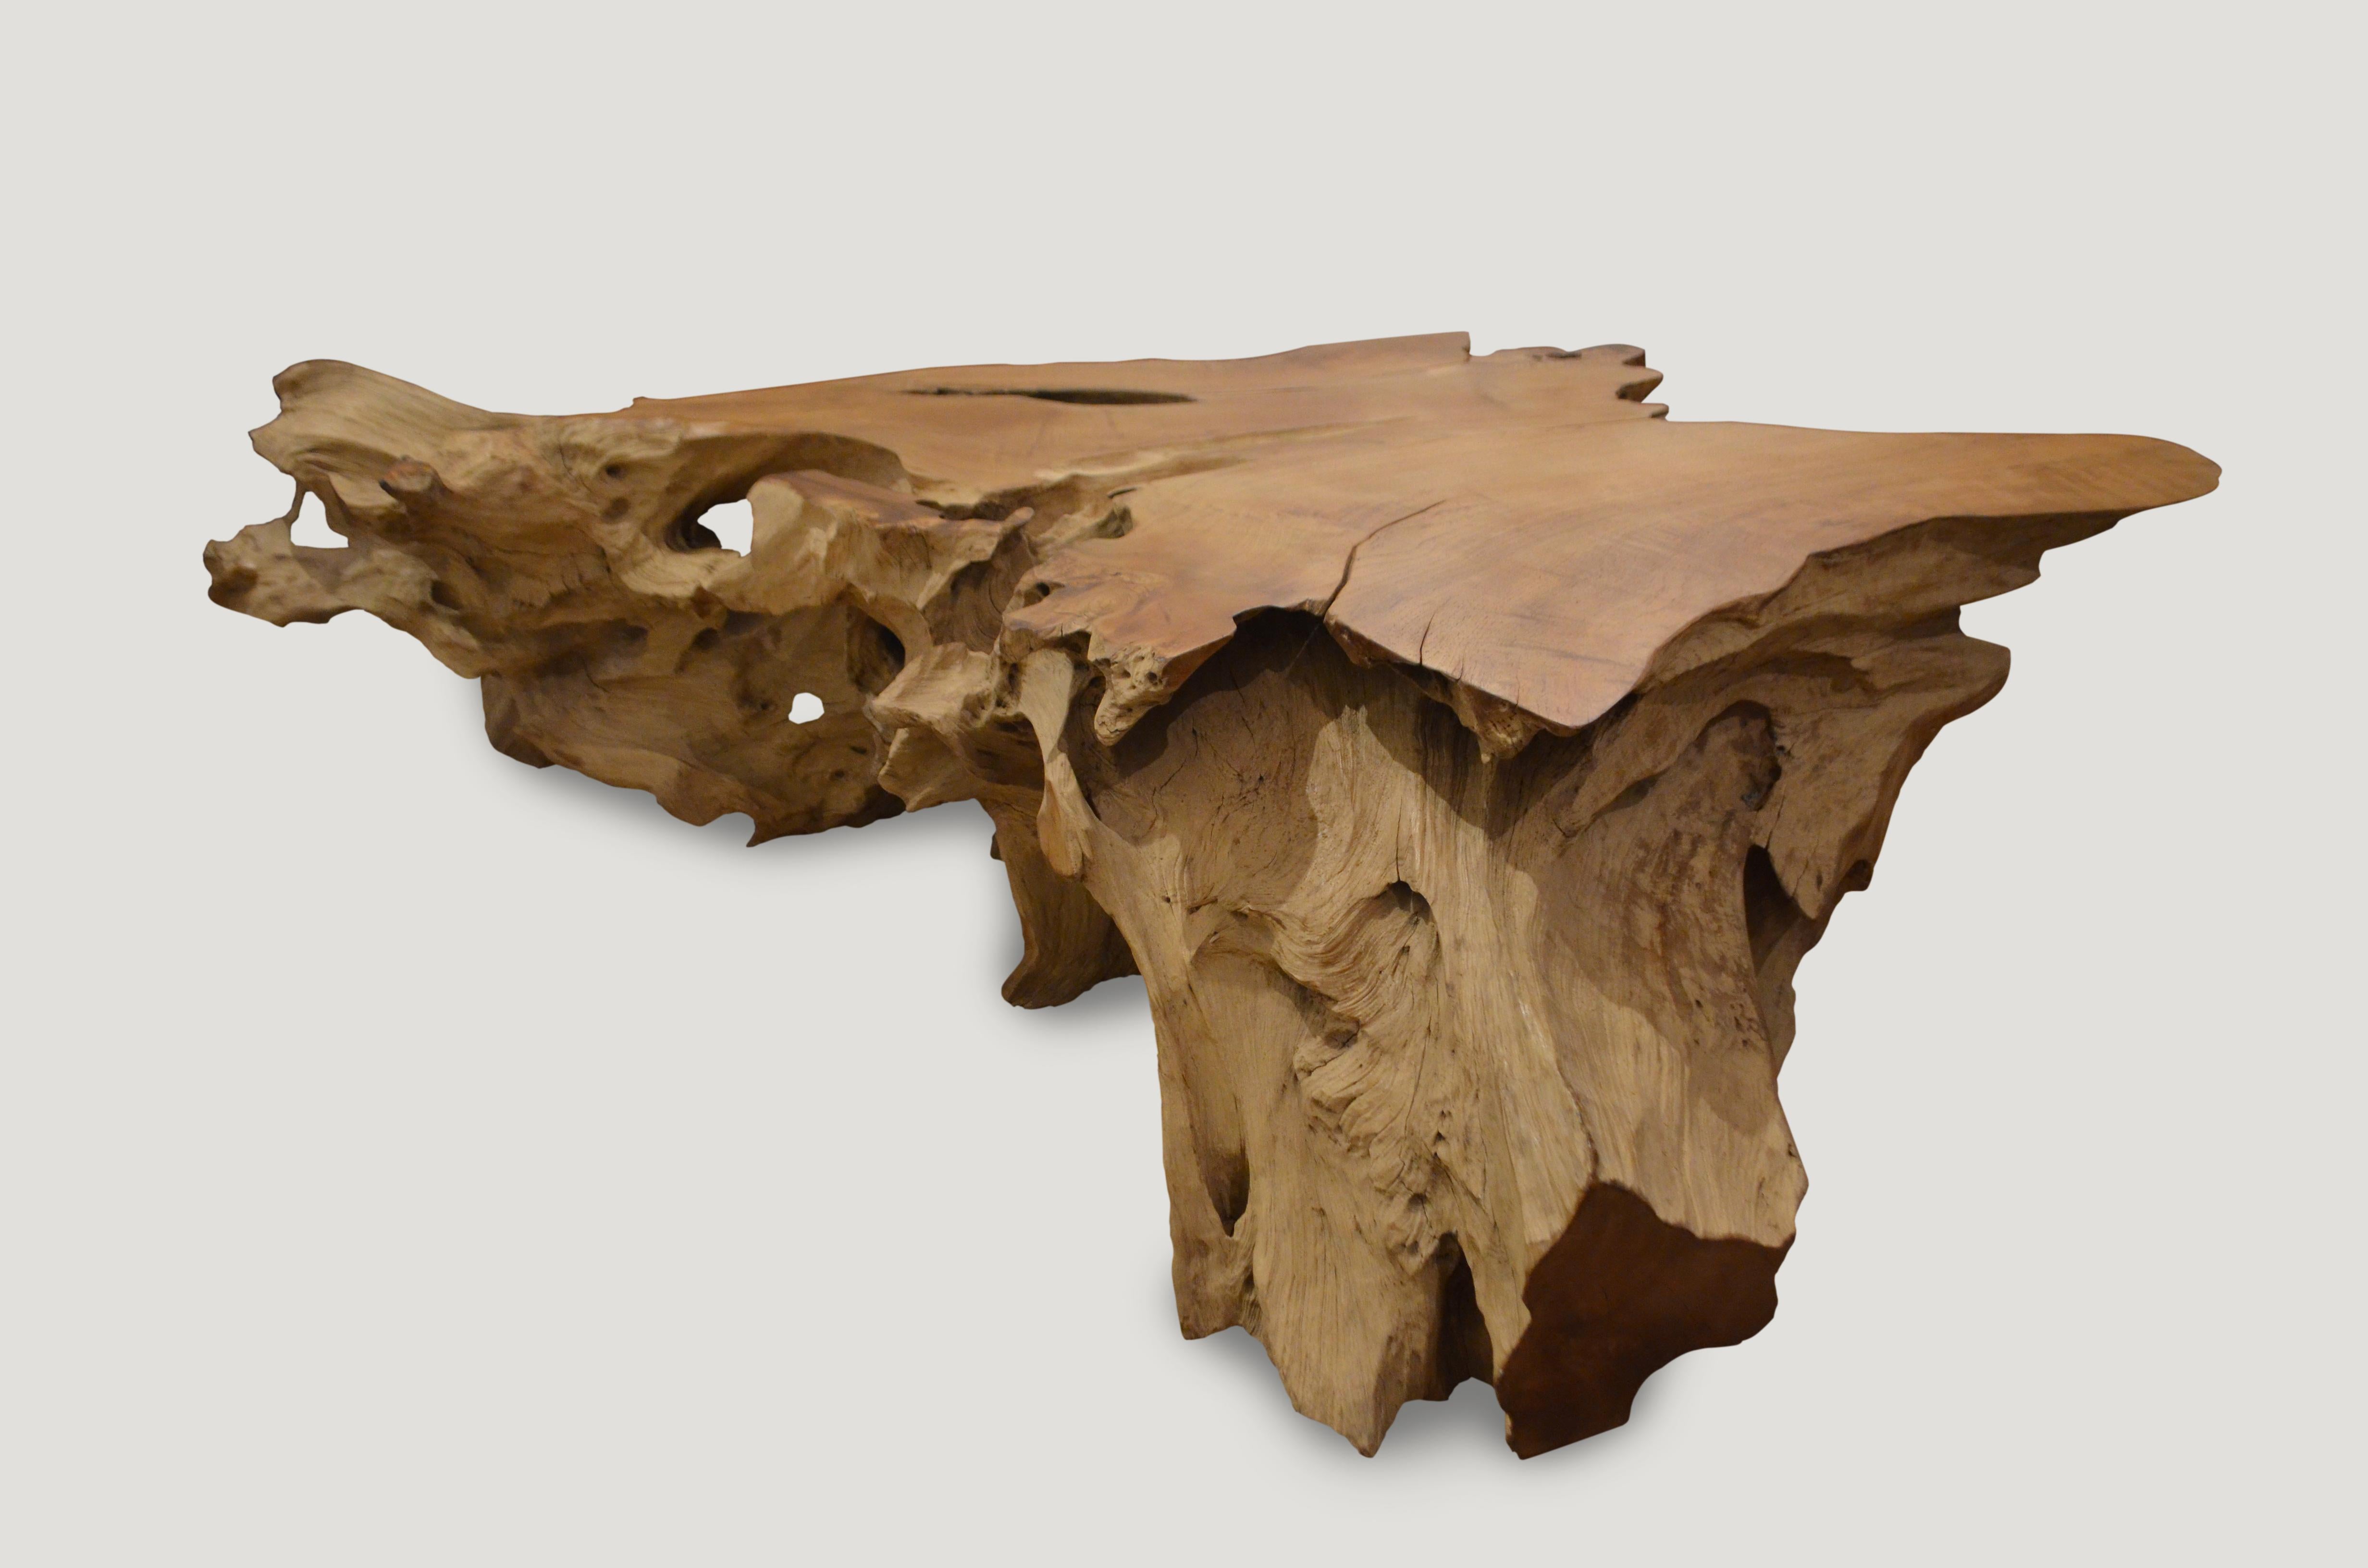 Natural organic formed reclaimed teak wood root coffee table. This piece is a cross section taken from the root of a large tree. A combination of raw teak and a polished teak top.

Andrianna Shamaris. The Leader In Modern Organic Design™